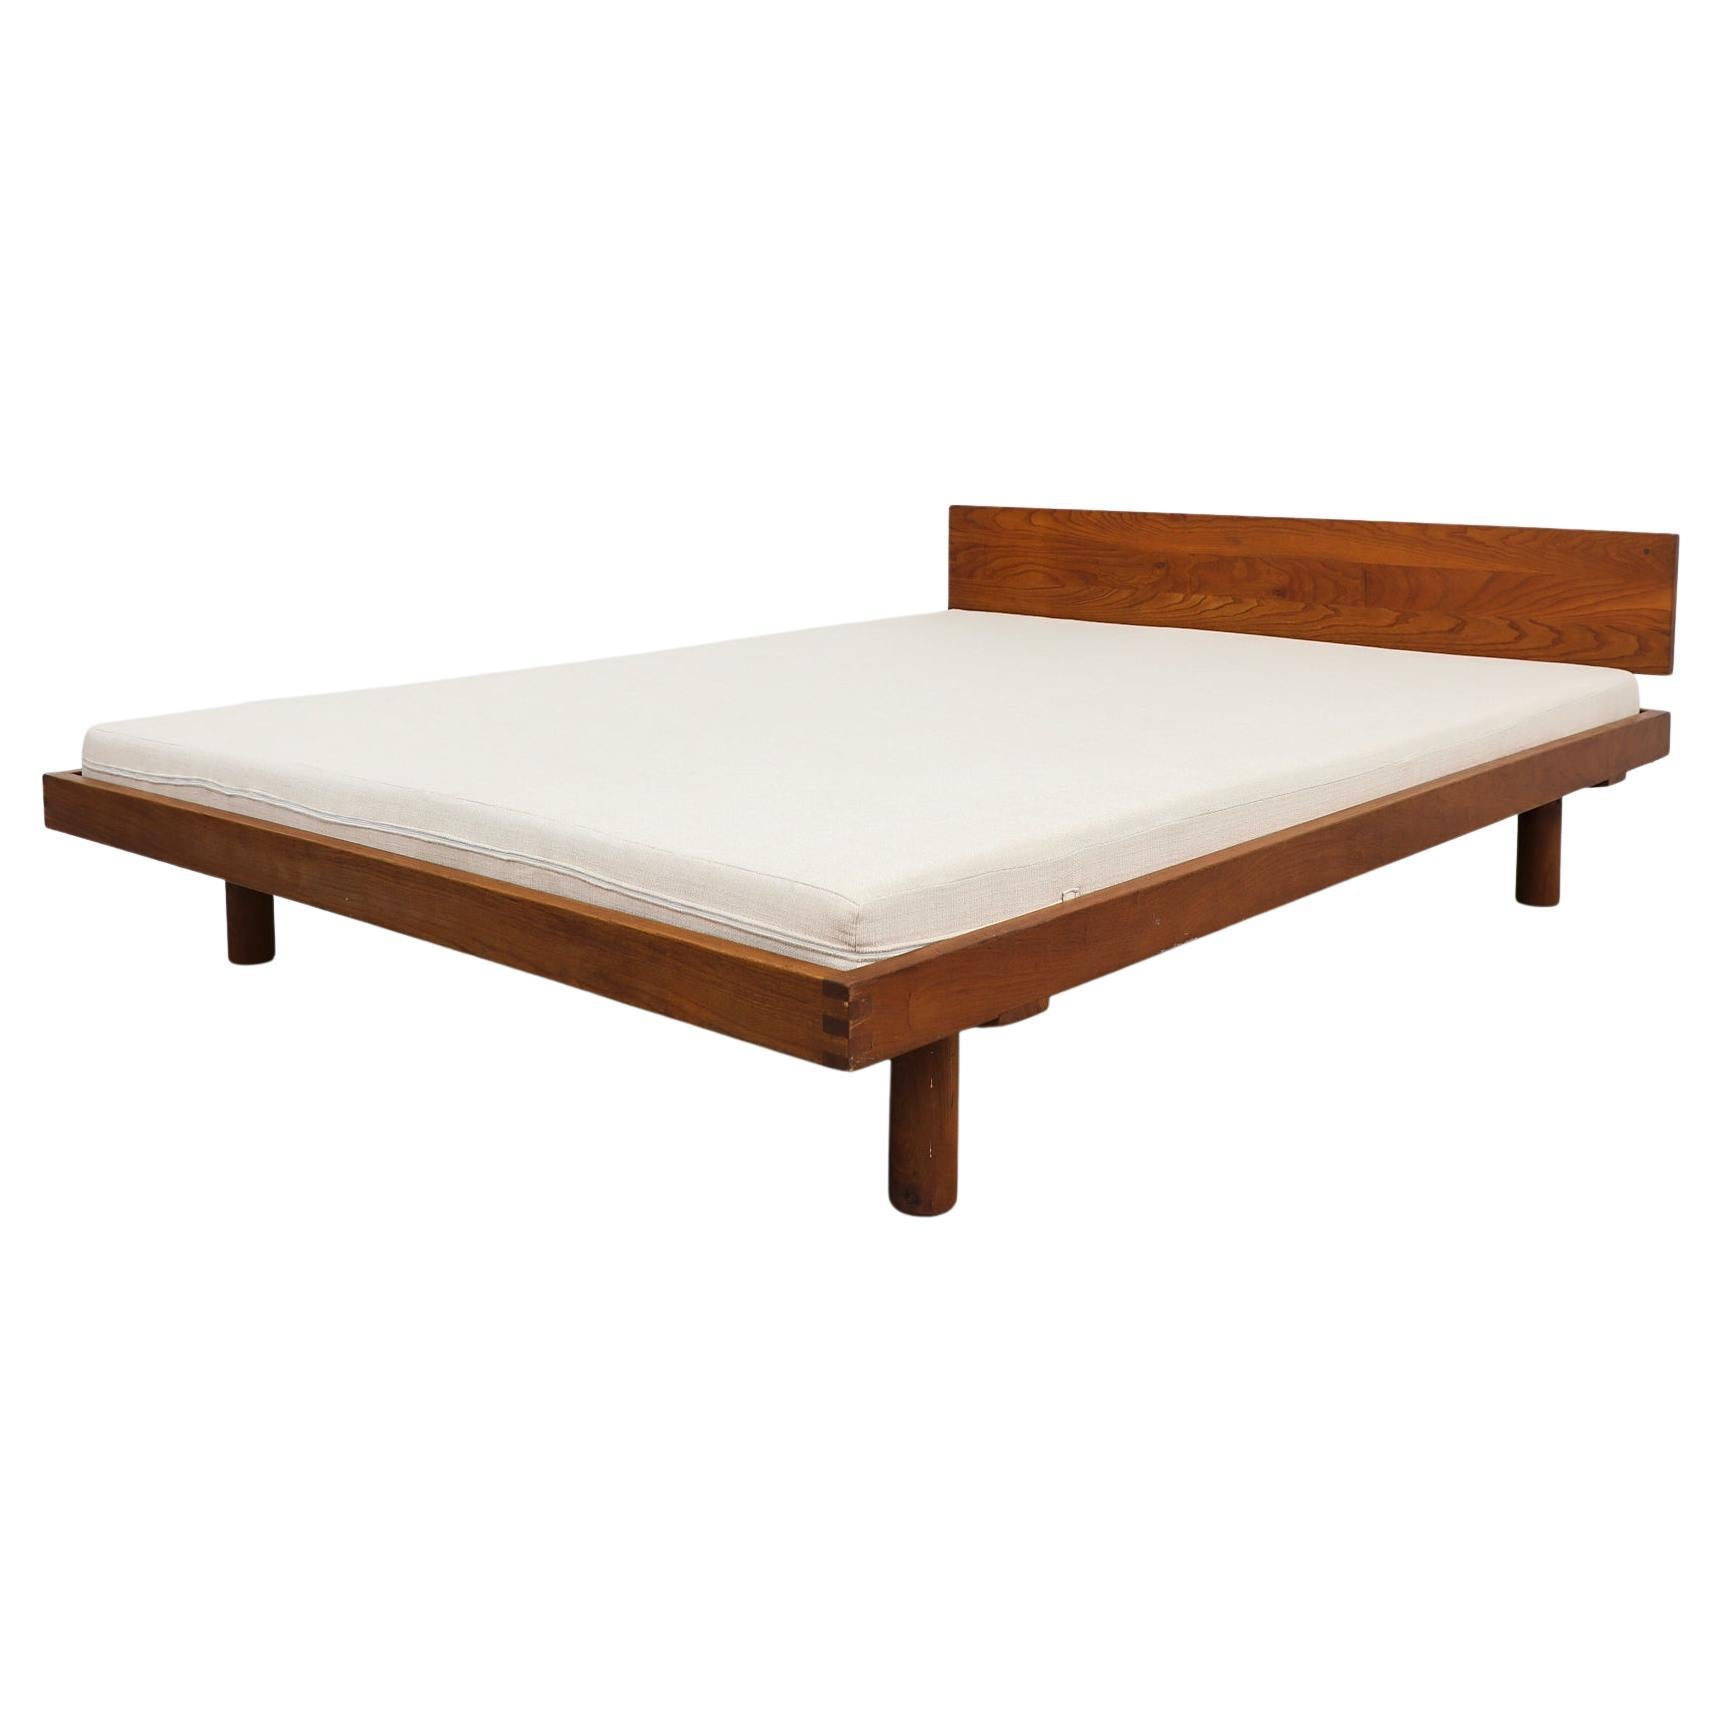 Pierre Chapo Model 'Godot/L01' Double Bed with Headboard in Elm, 1960s For Sale